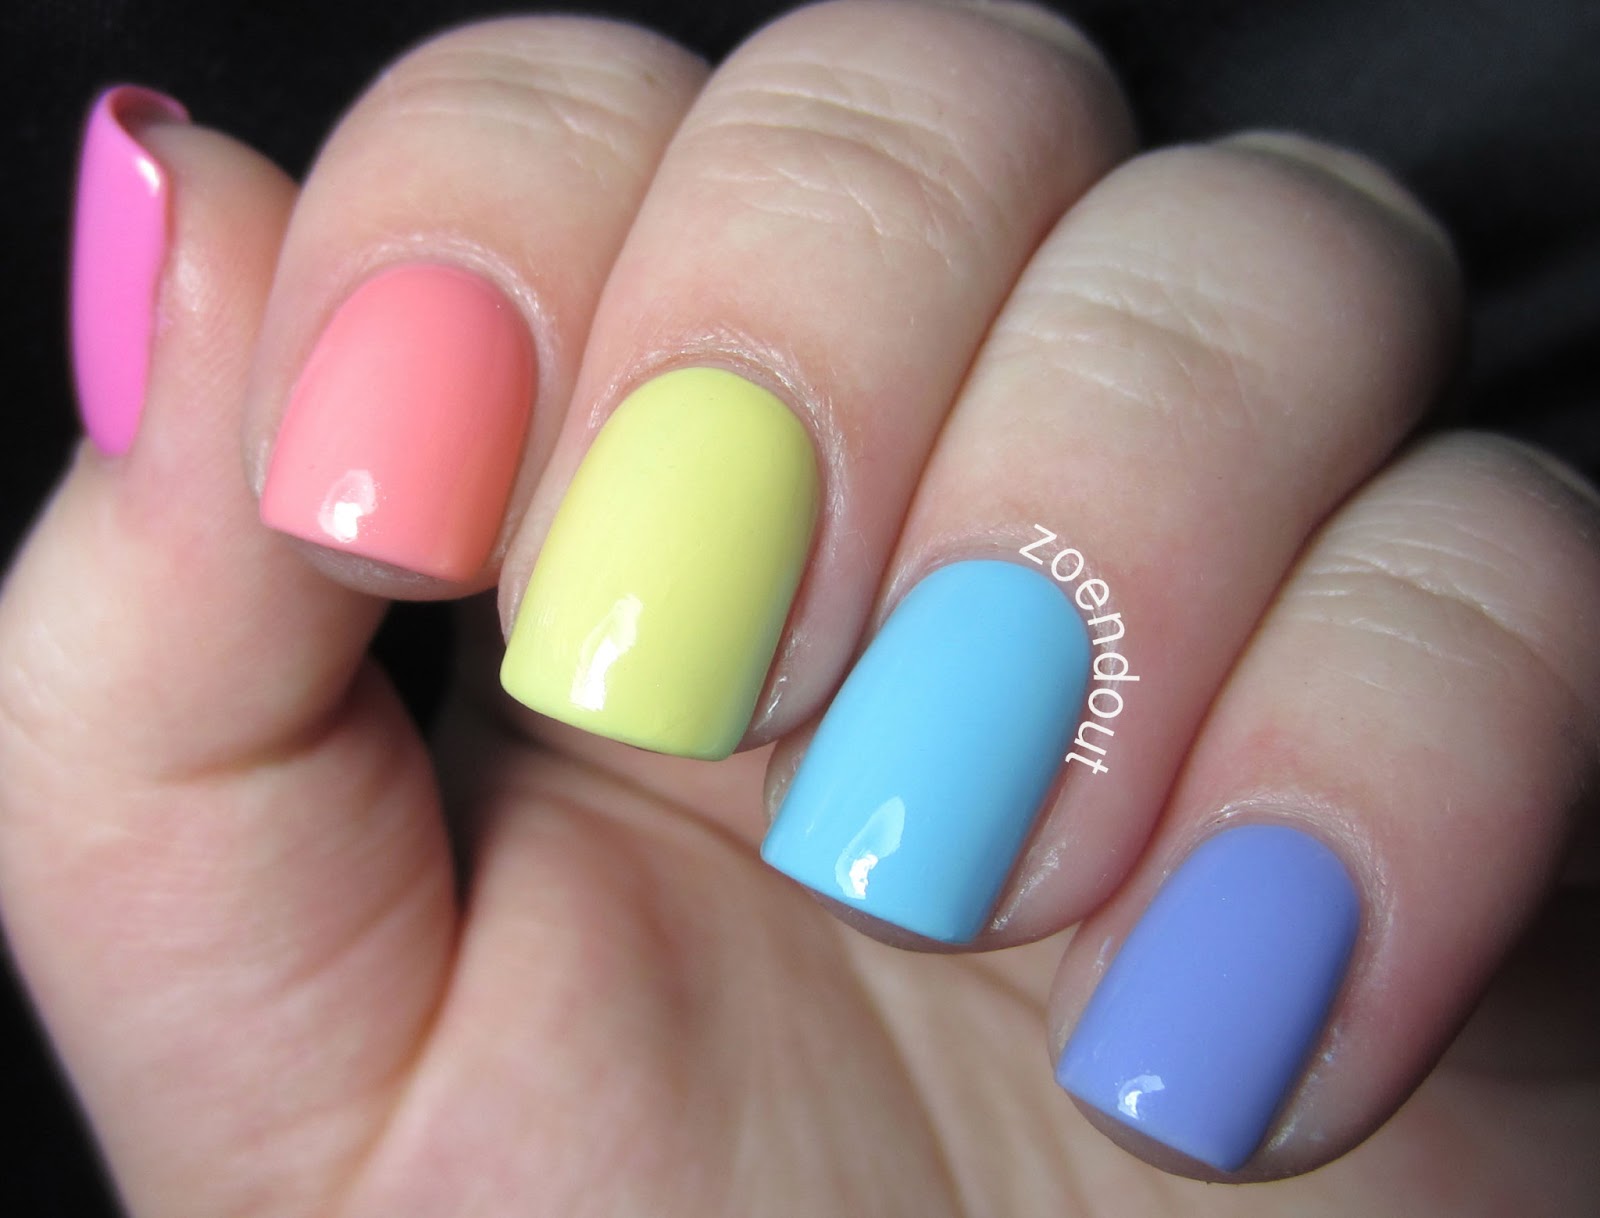 10. DIY Pastel Nail Polish Swirls for a Fun and Playful Look - wide 6